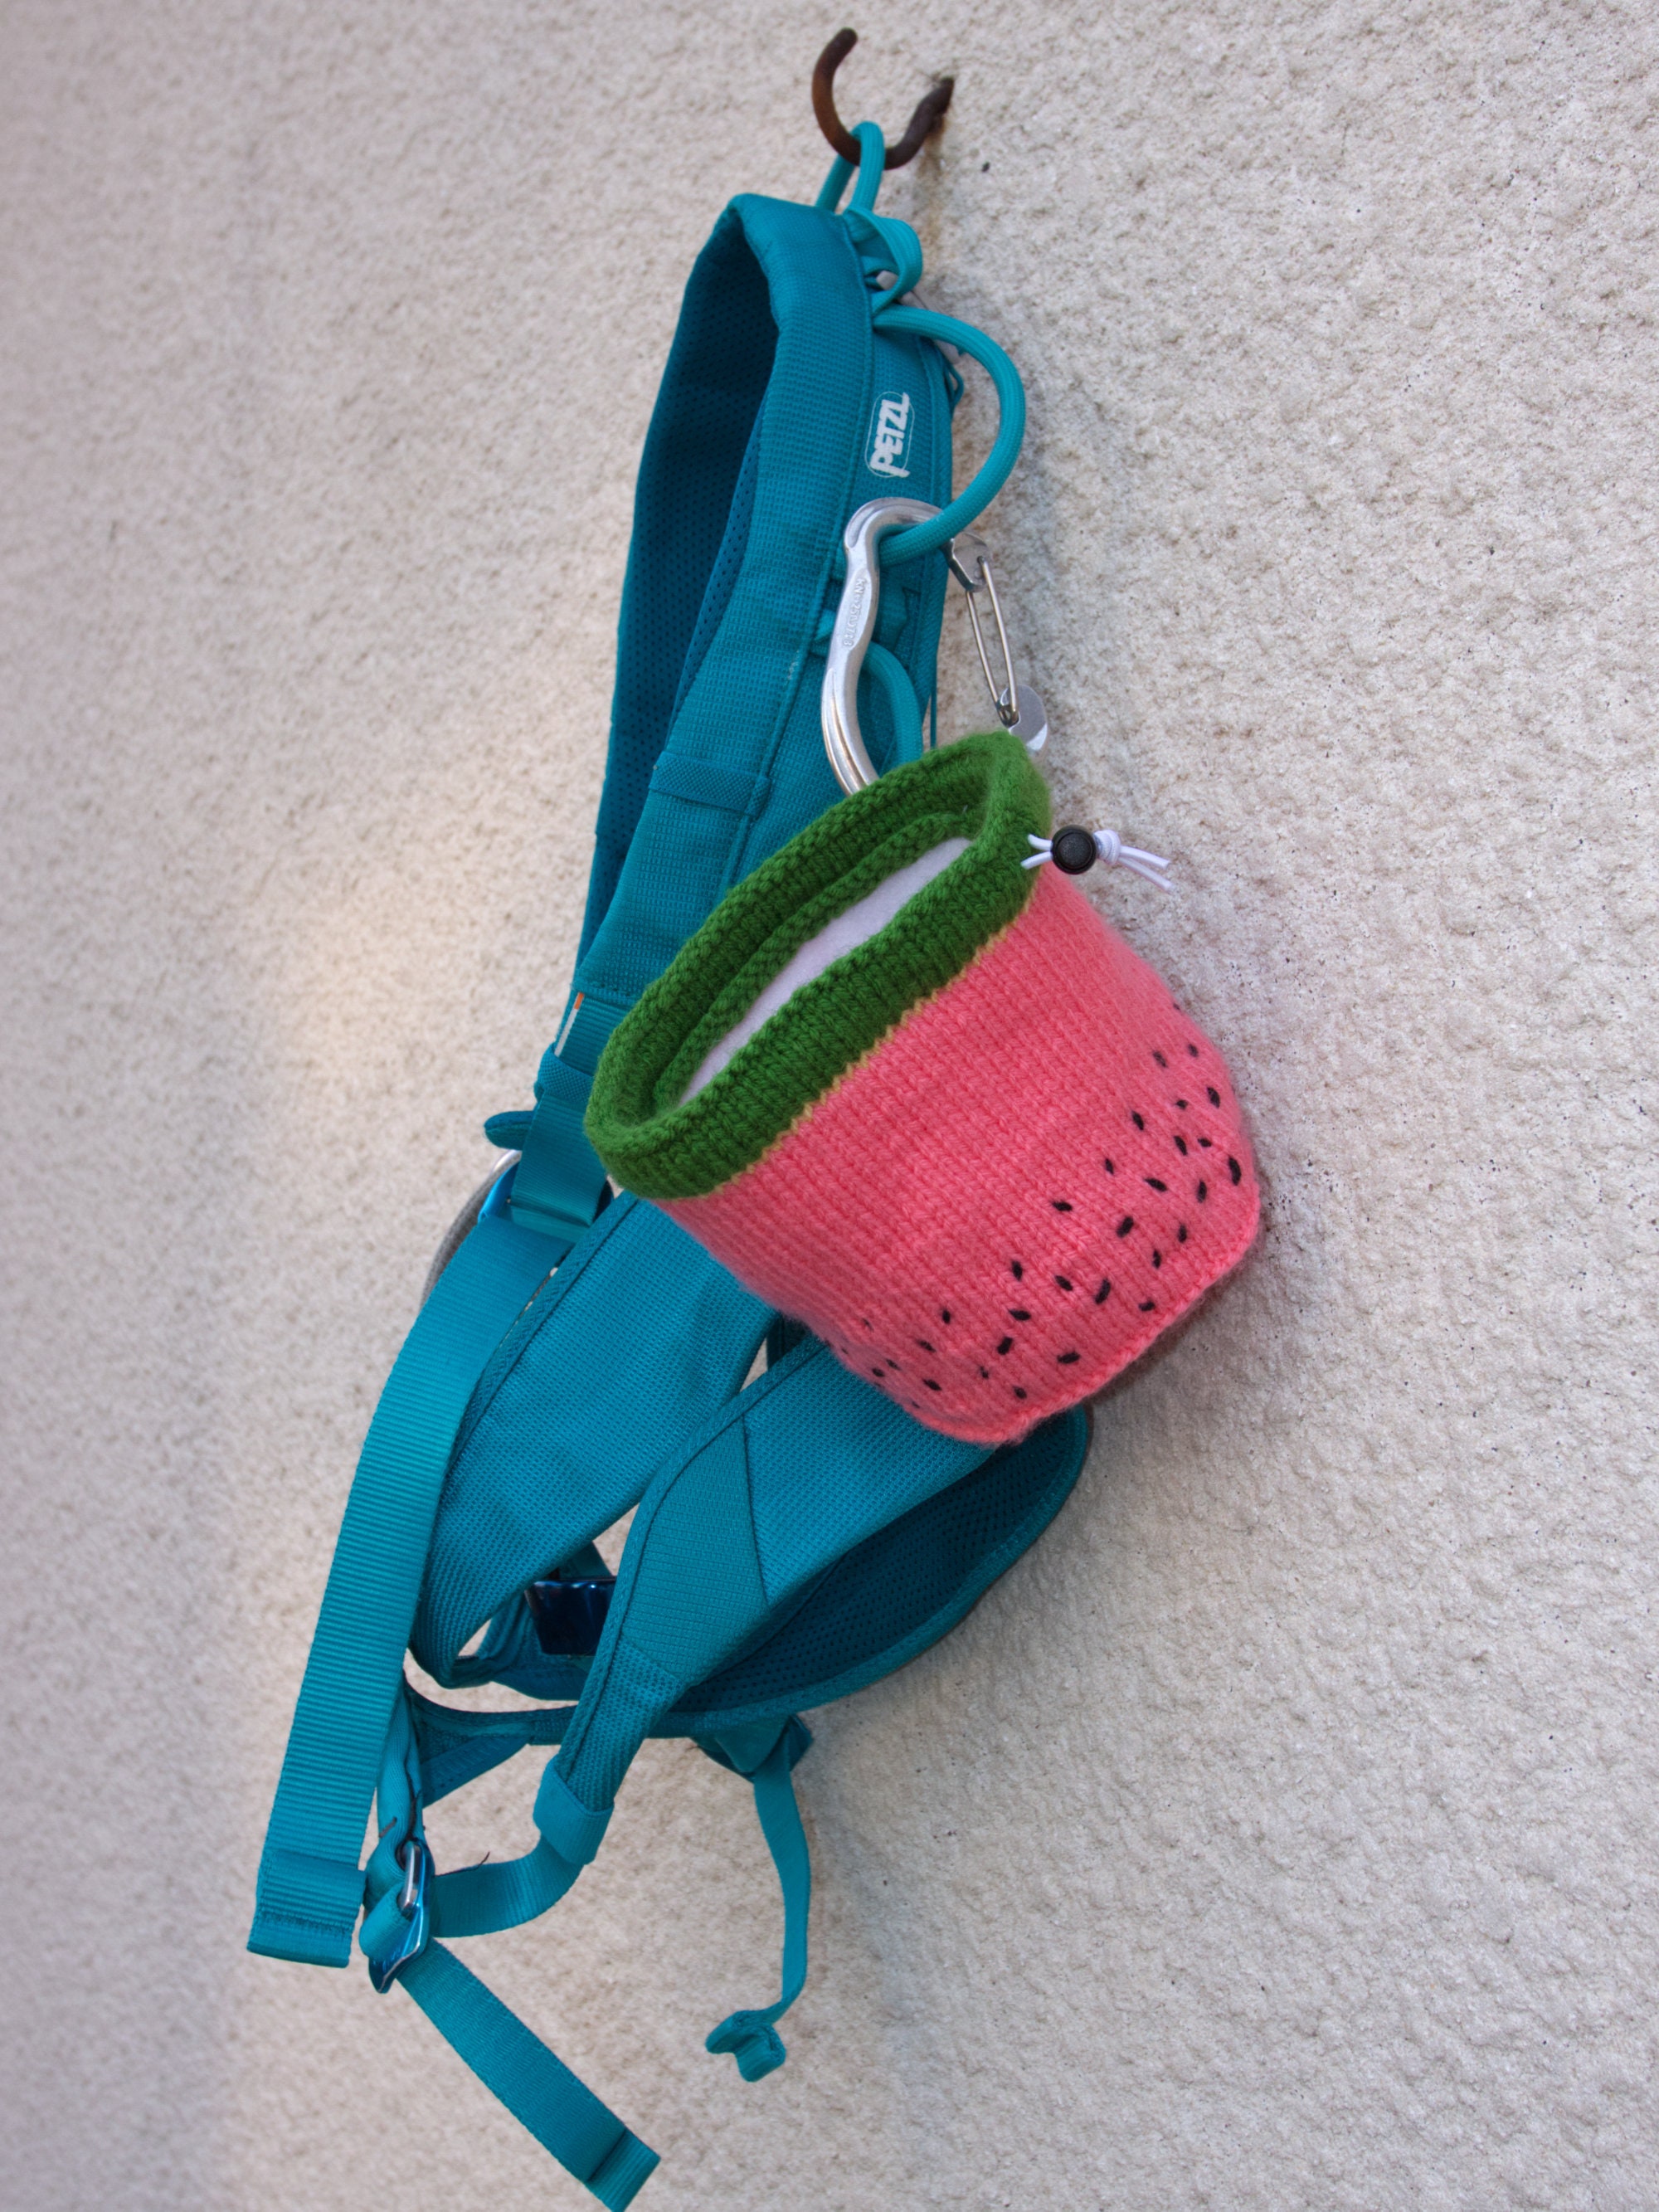 Made myself a chalk bag for when I go rock climbing : r/knitting